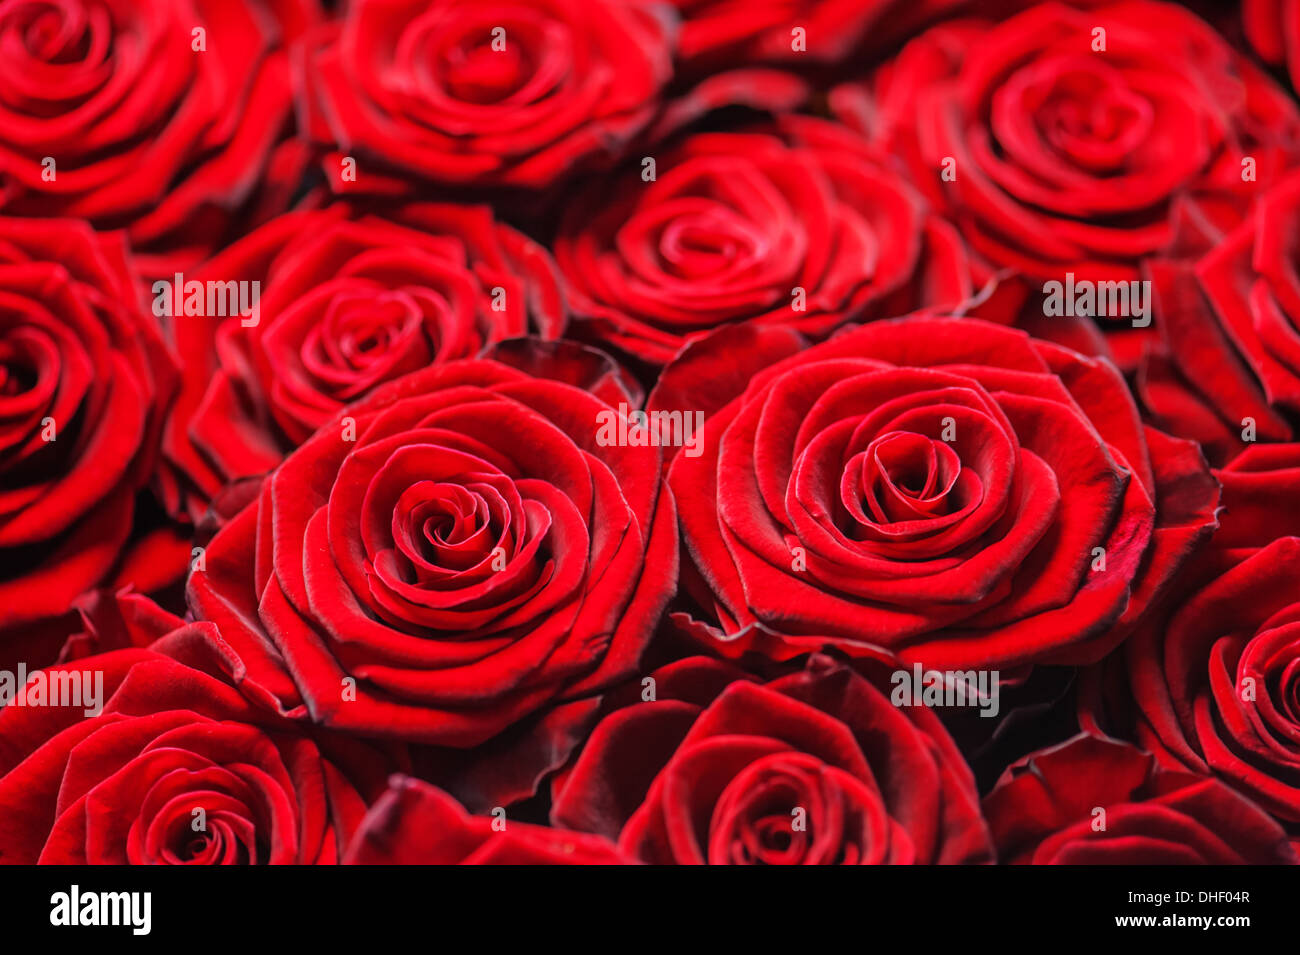 red rose pattern close up Stock Photo